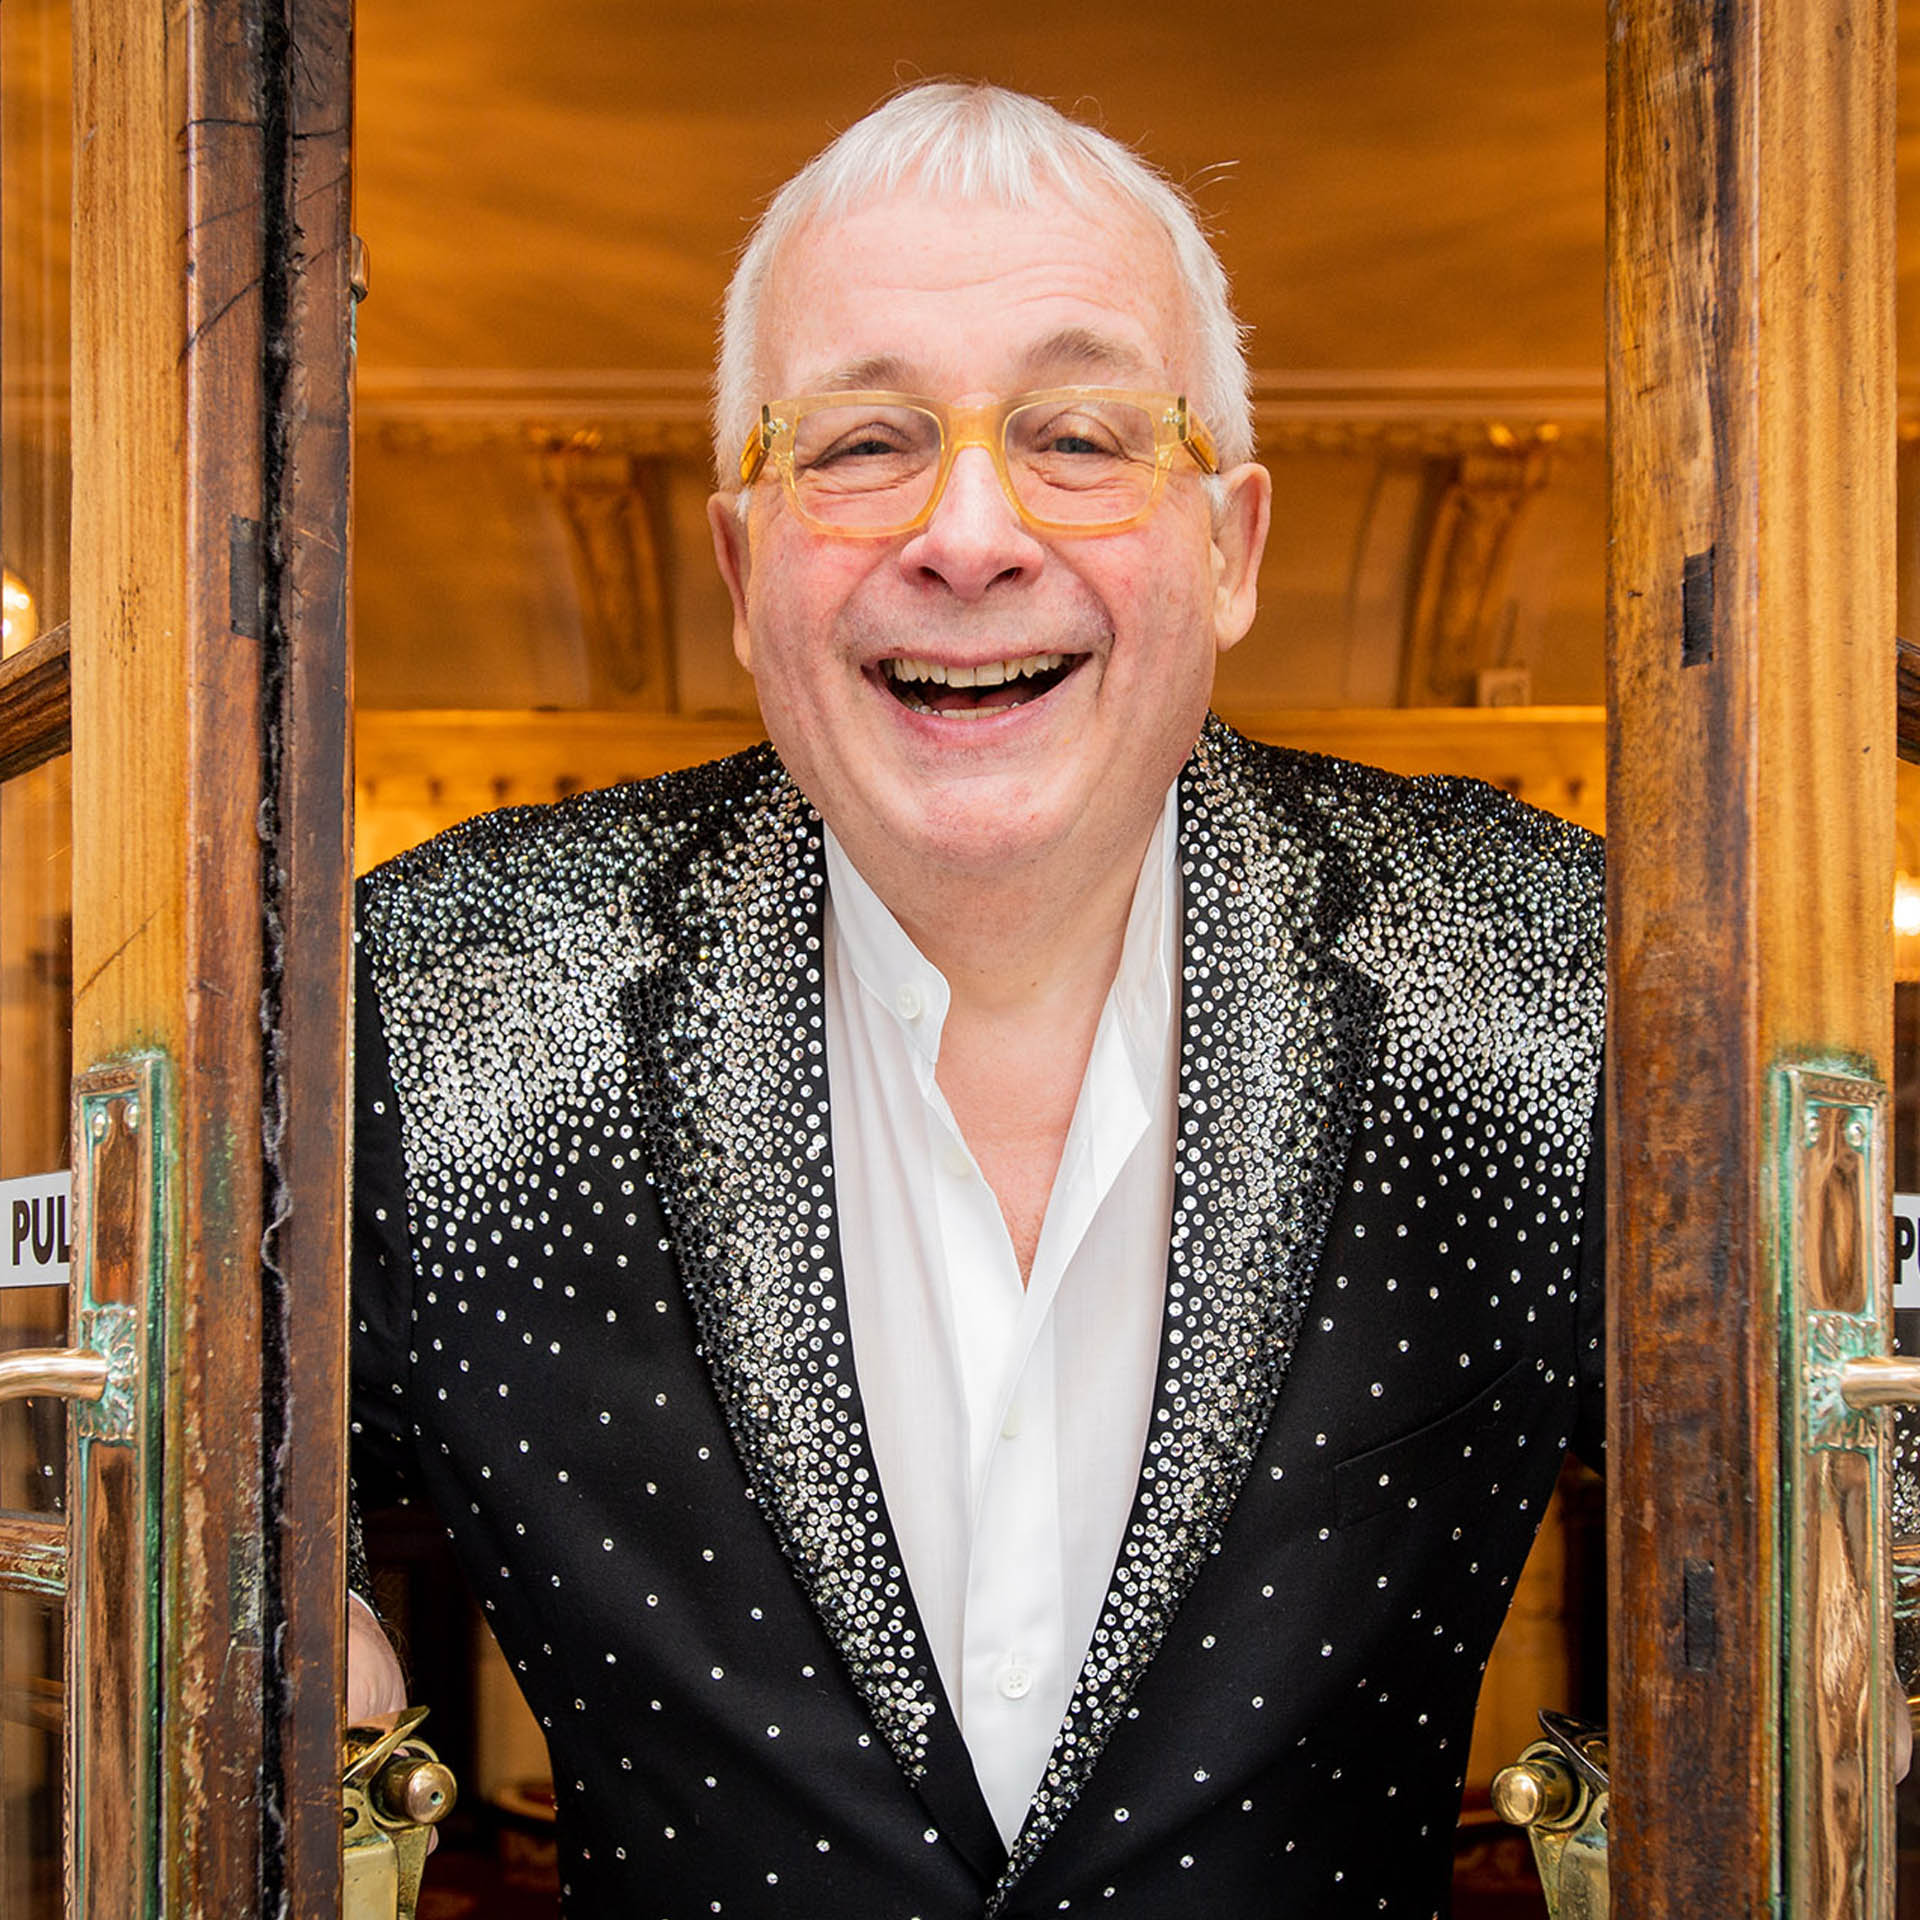 EVENTS THAT MADE ME - christopher biggins